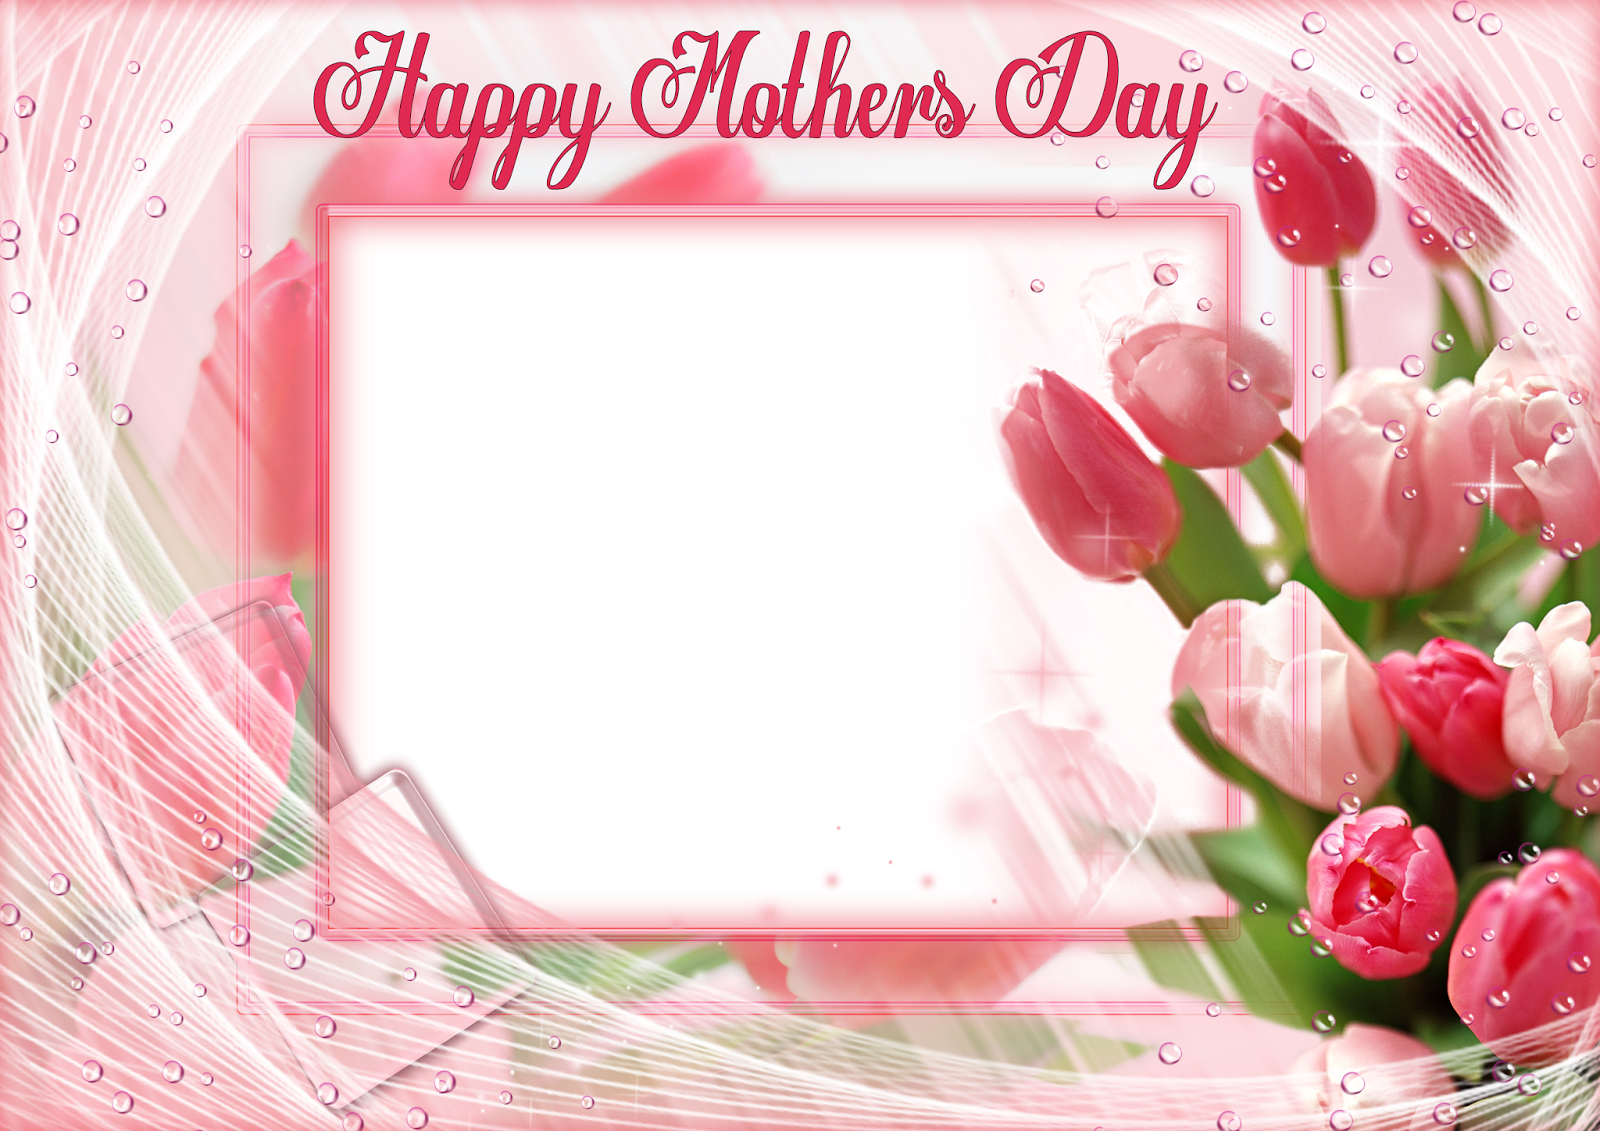 Clipart frames mothers day, Clipart frames mothers day Transparent FREE